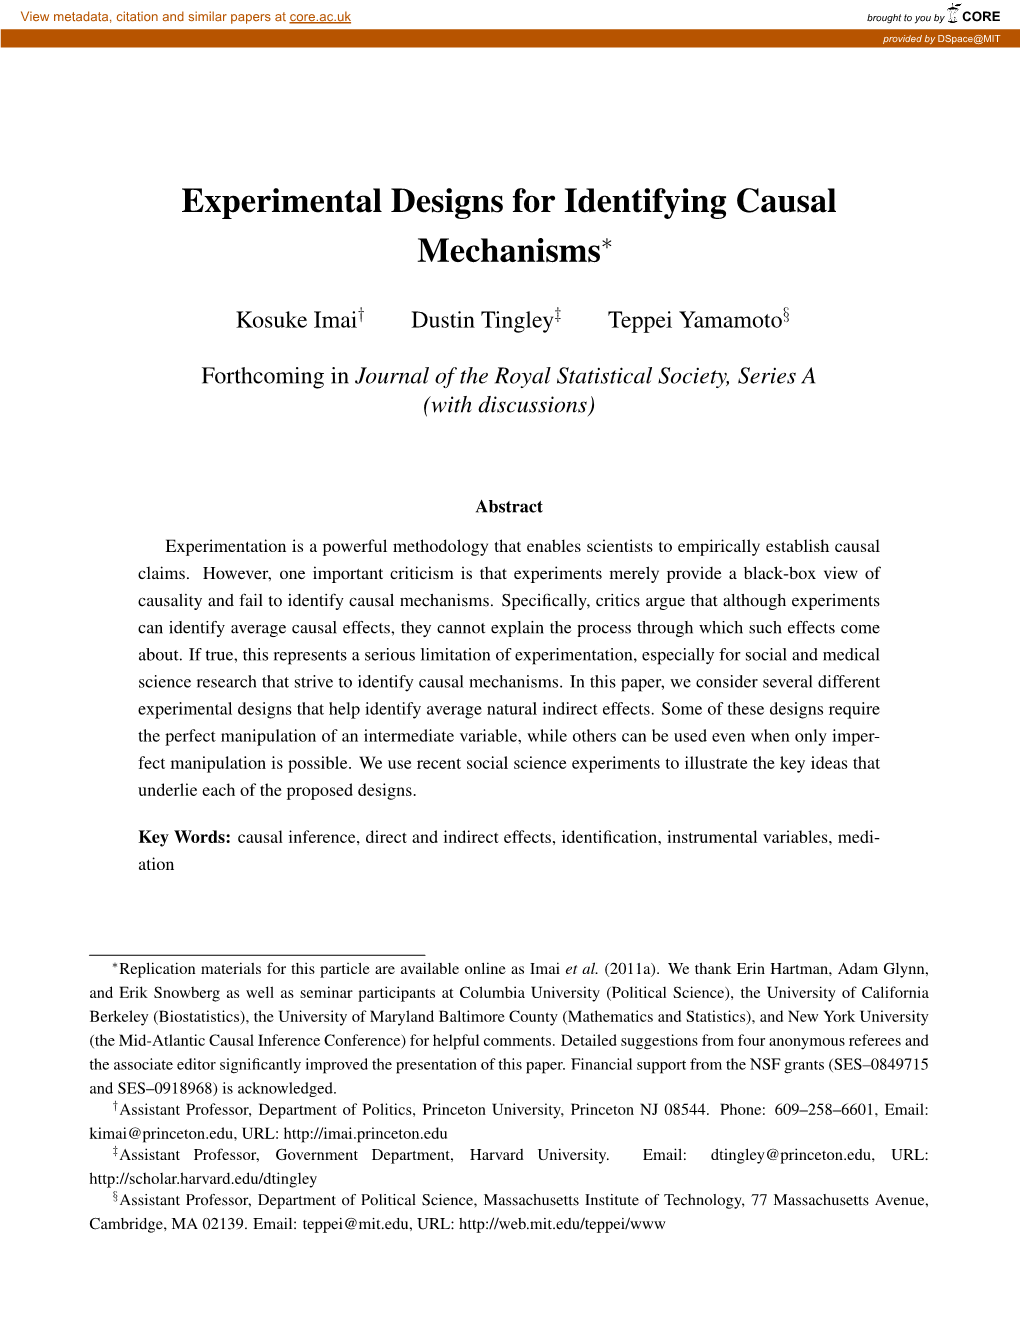 Experimental Designs for Identifying Causal Mechanisms∗